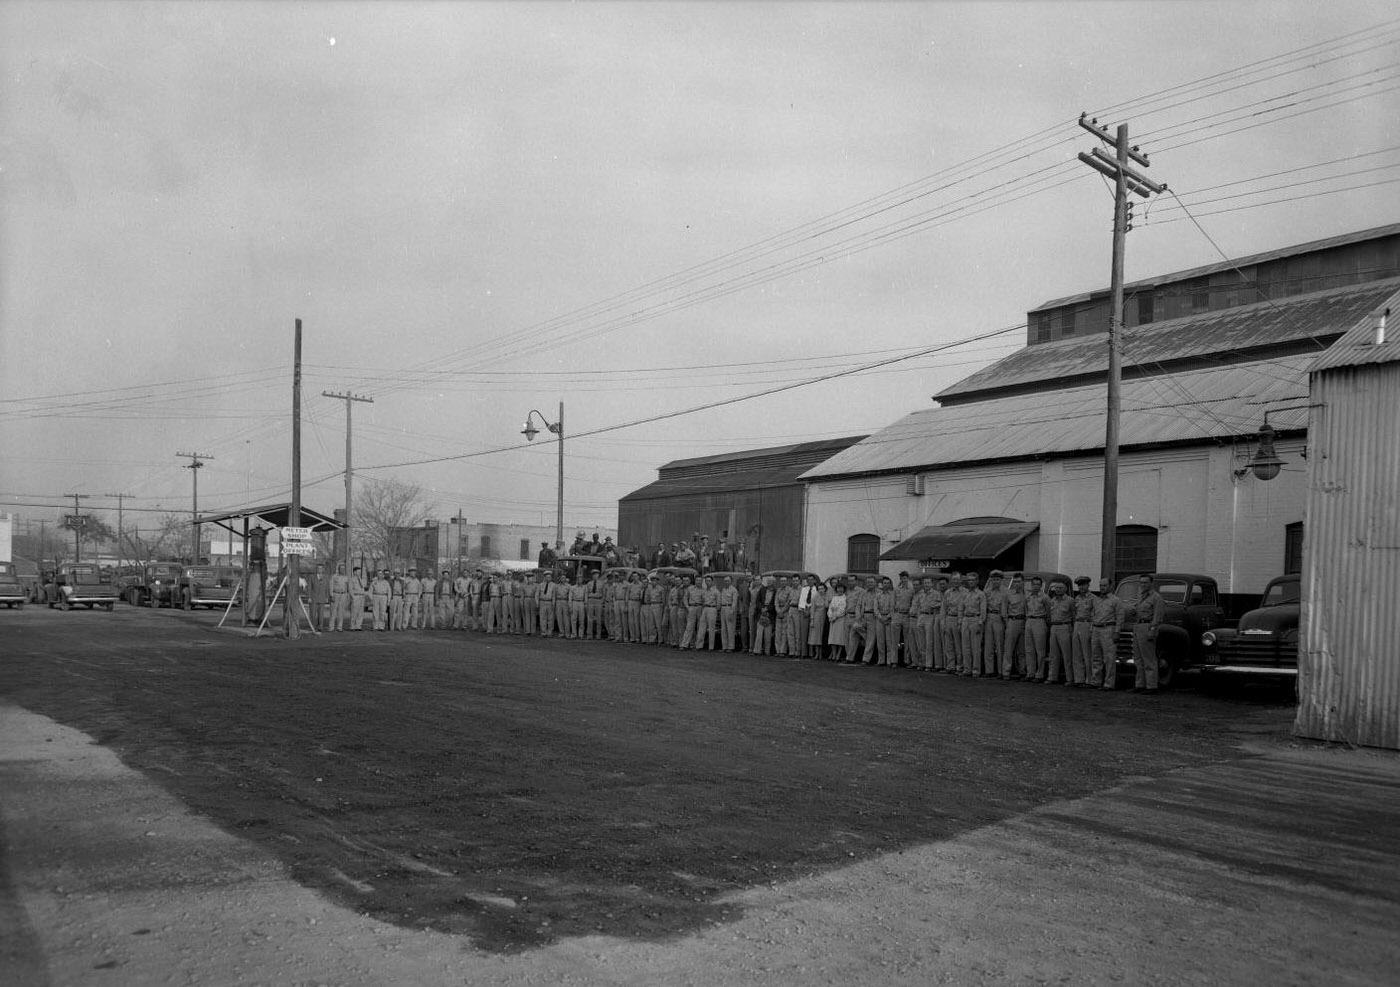 Southern Union Gas Company, Employee Group Photo at Warehouse, 1951.